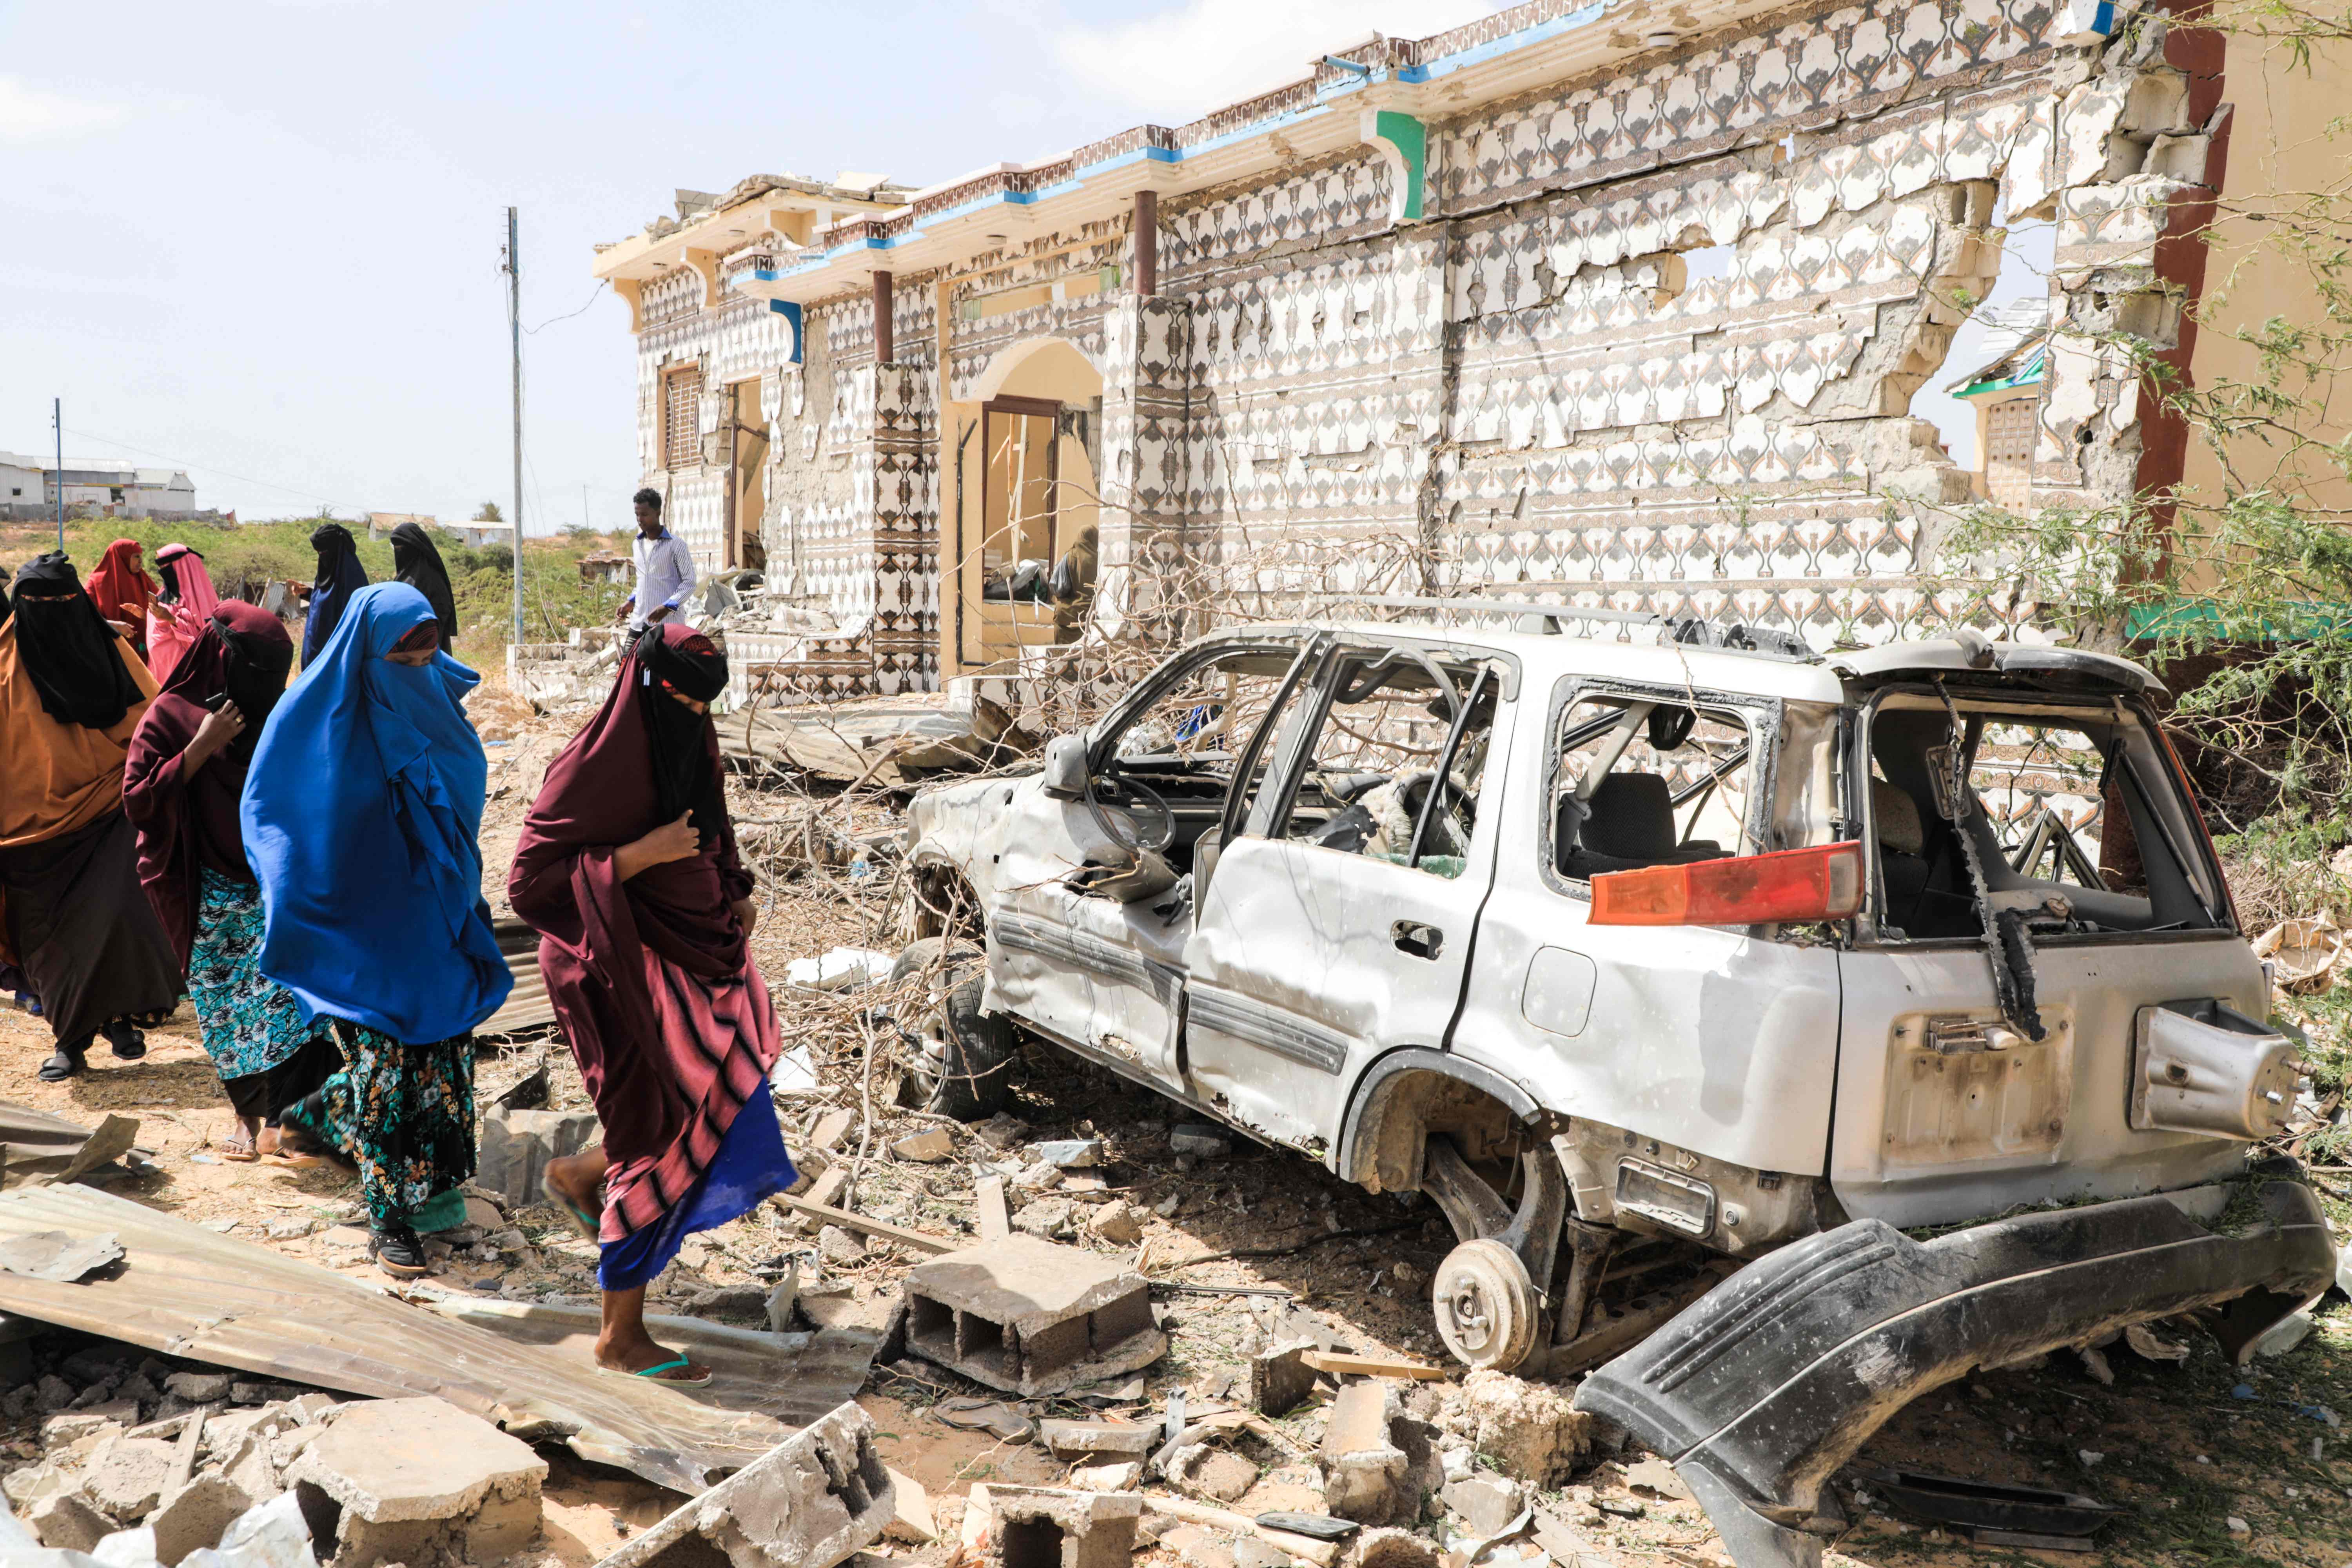 Women walk next to a destroyed house and the wreckage of a car following an explosion provoked by Al-Shabaab militants’ in Mogadishu, Somalia, 16 February 2022